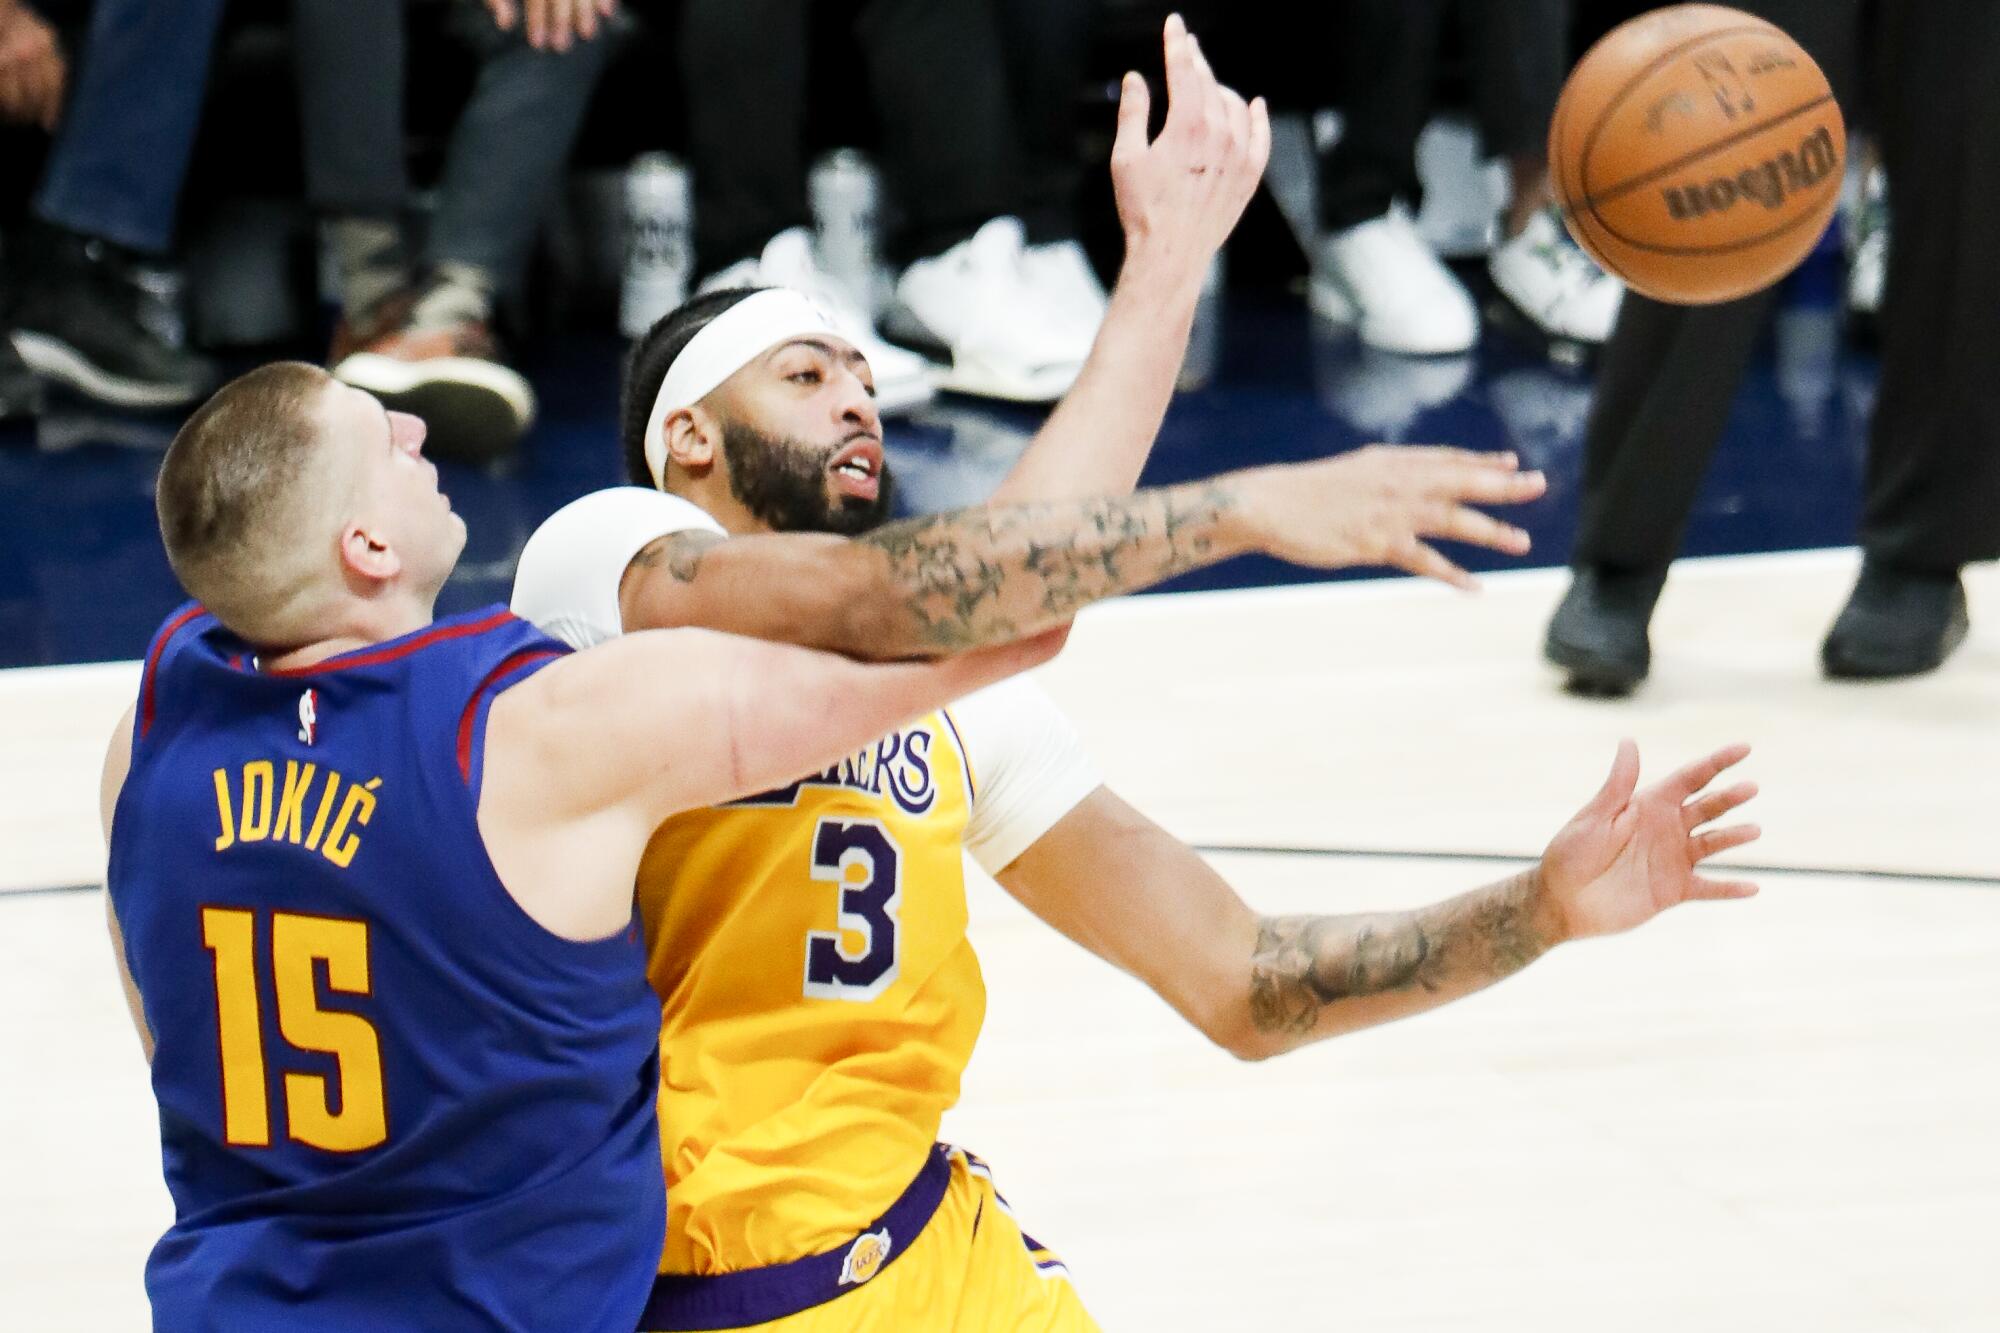 Photos: Lakers vs Nuggets (4/10/22) Photo Gallery